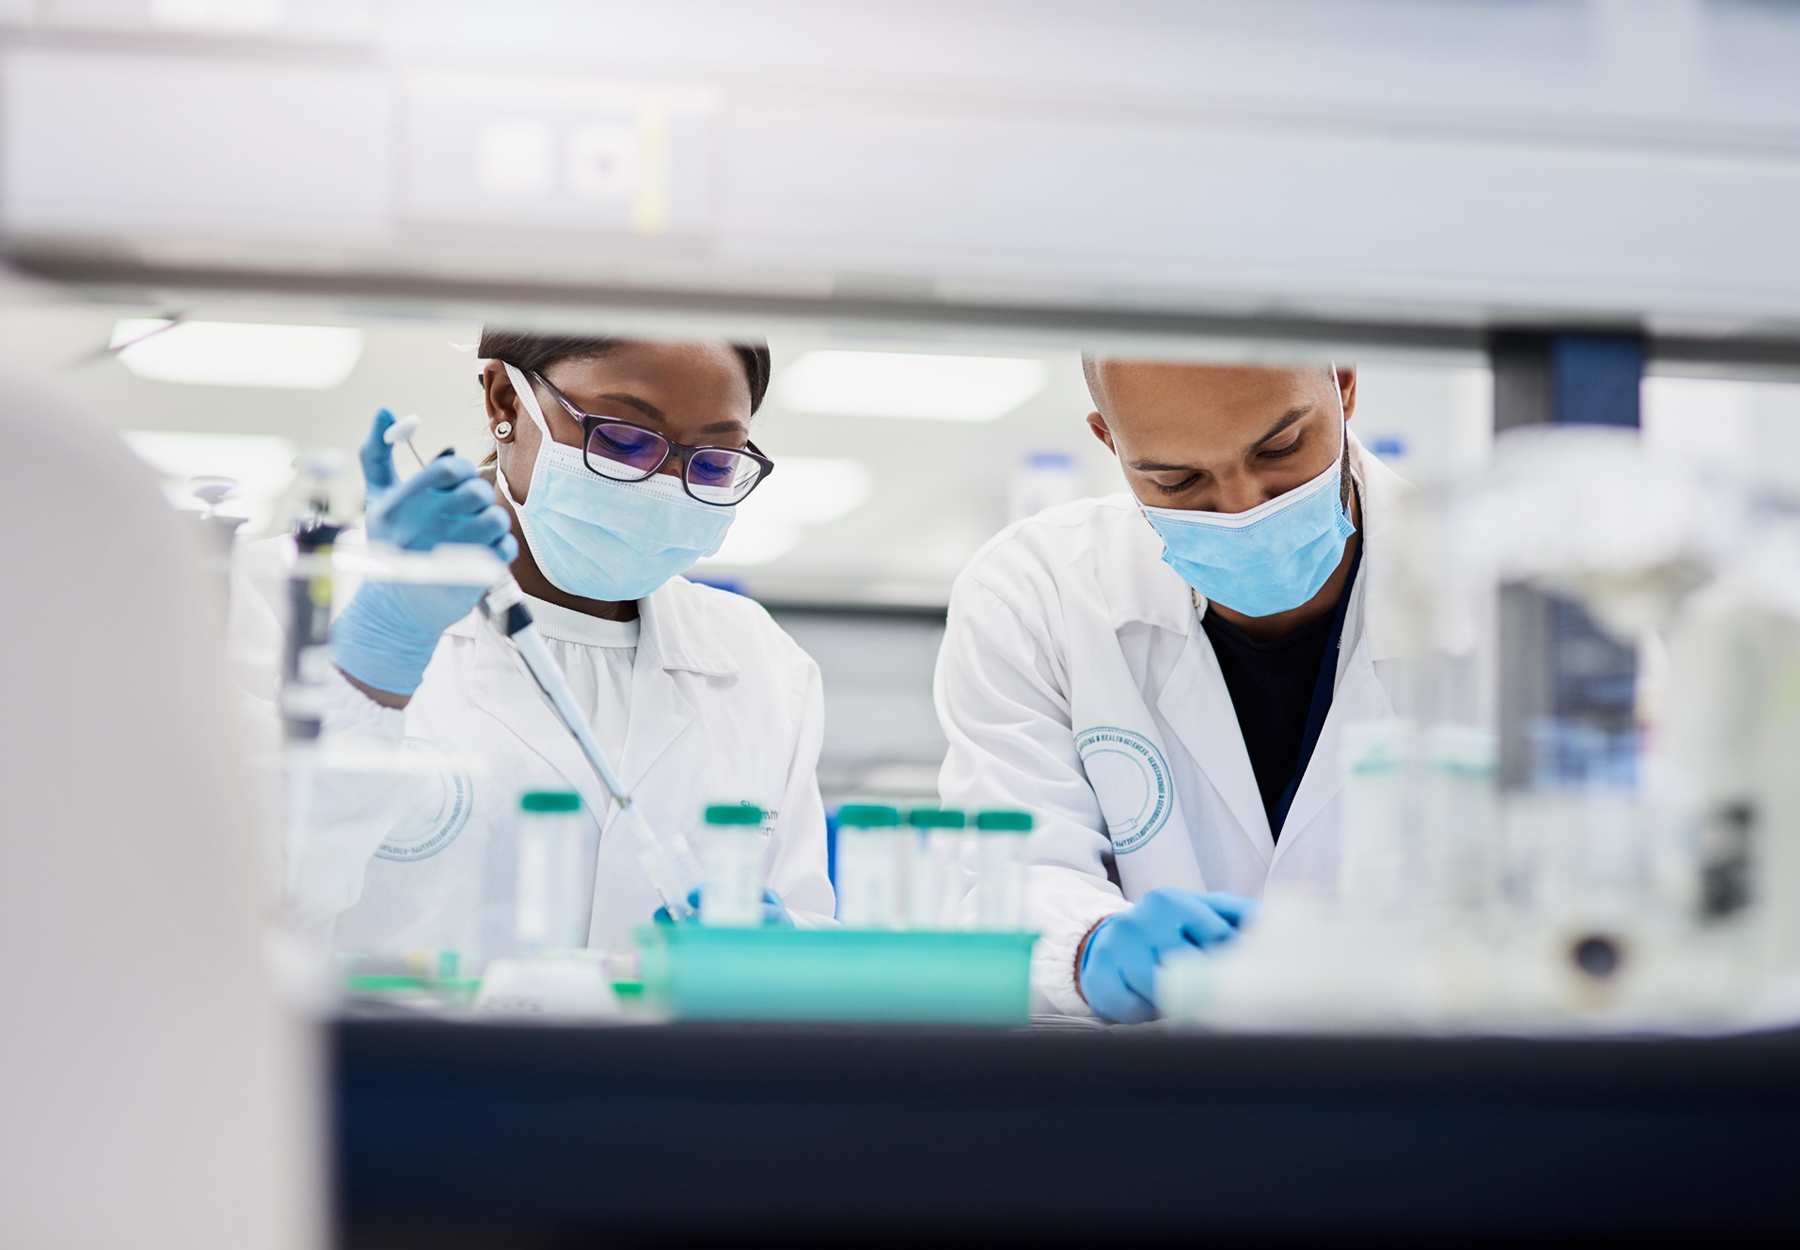 How to Save Clinical Labs from Future Pandemic Challenges